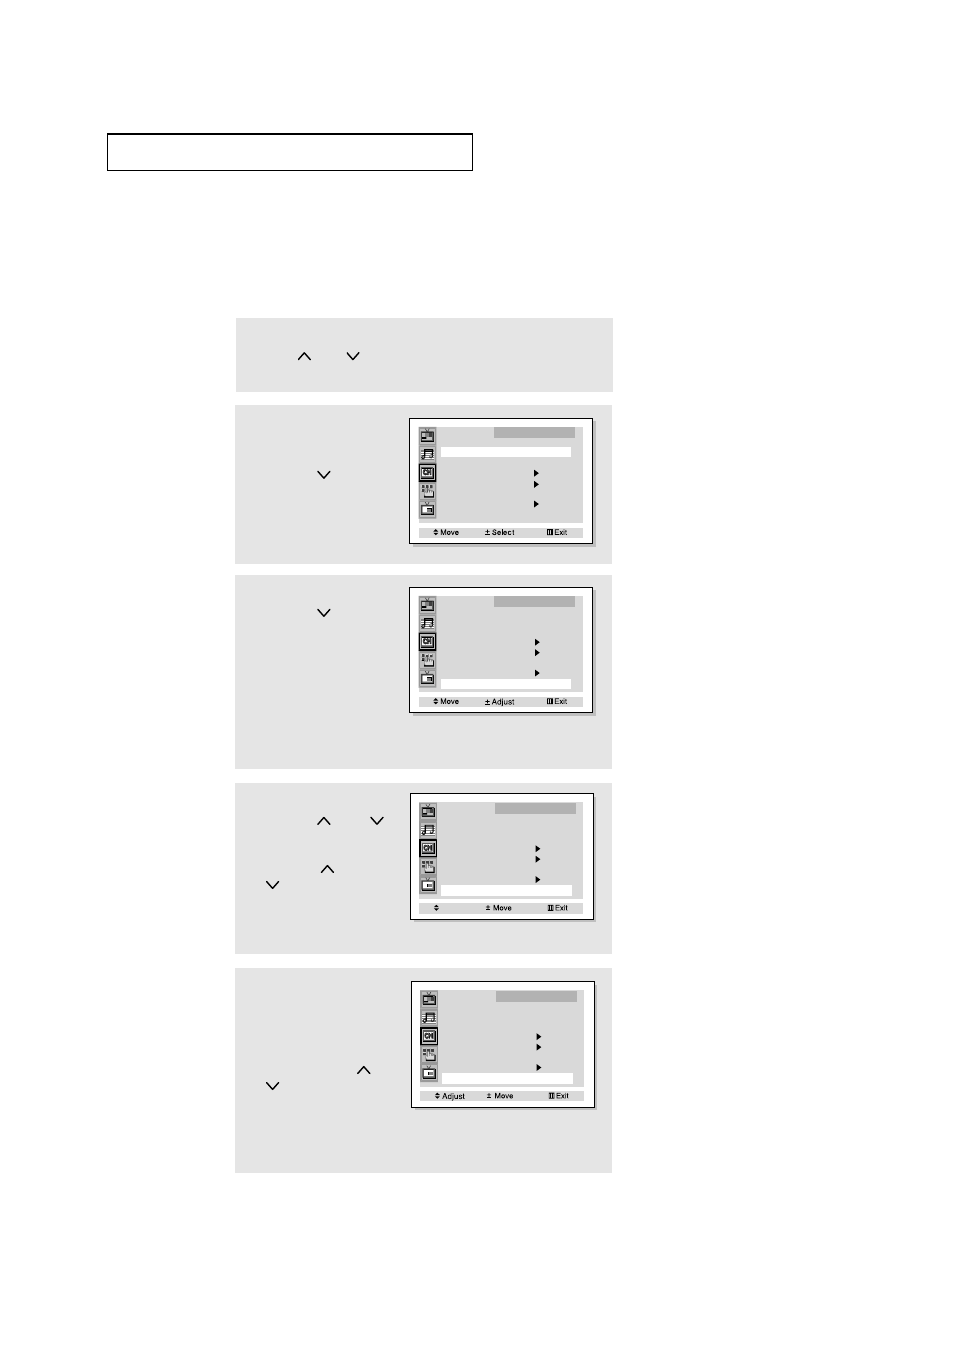 Labeling the channels | Samsung HCM5525WB User Manual | Page 35 / 67